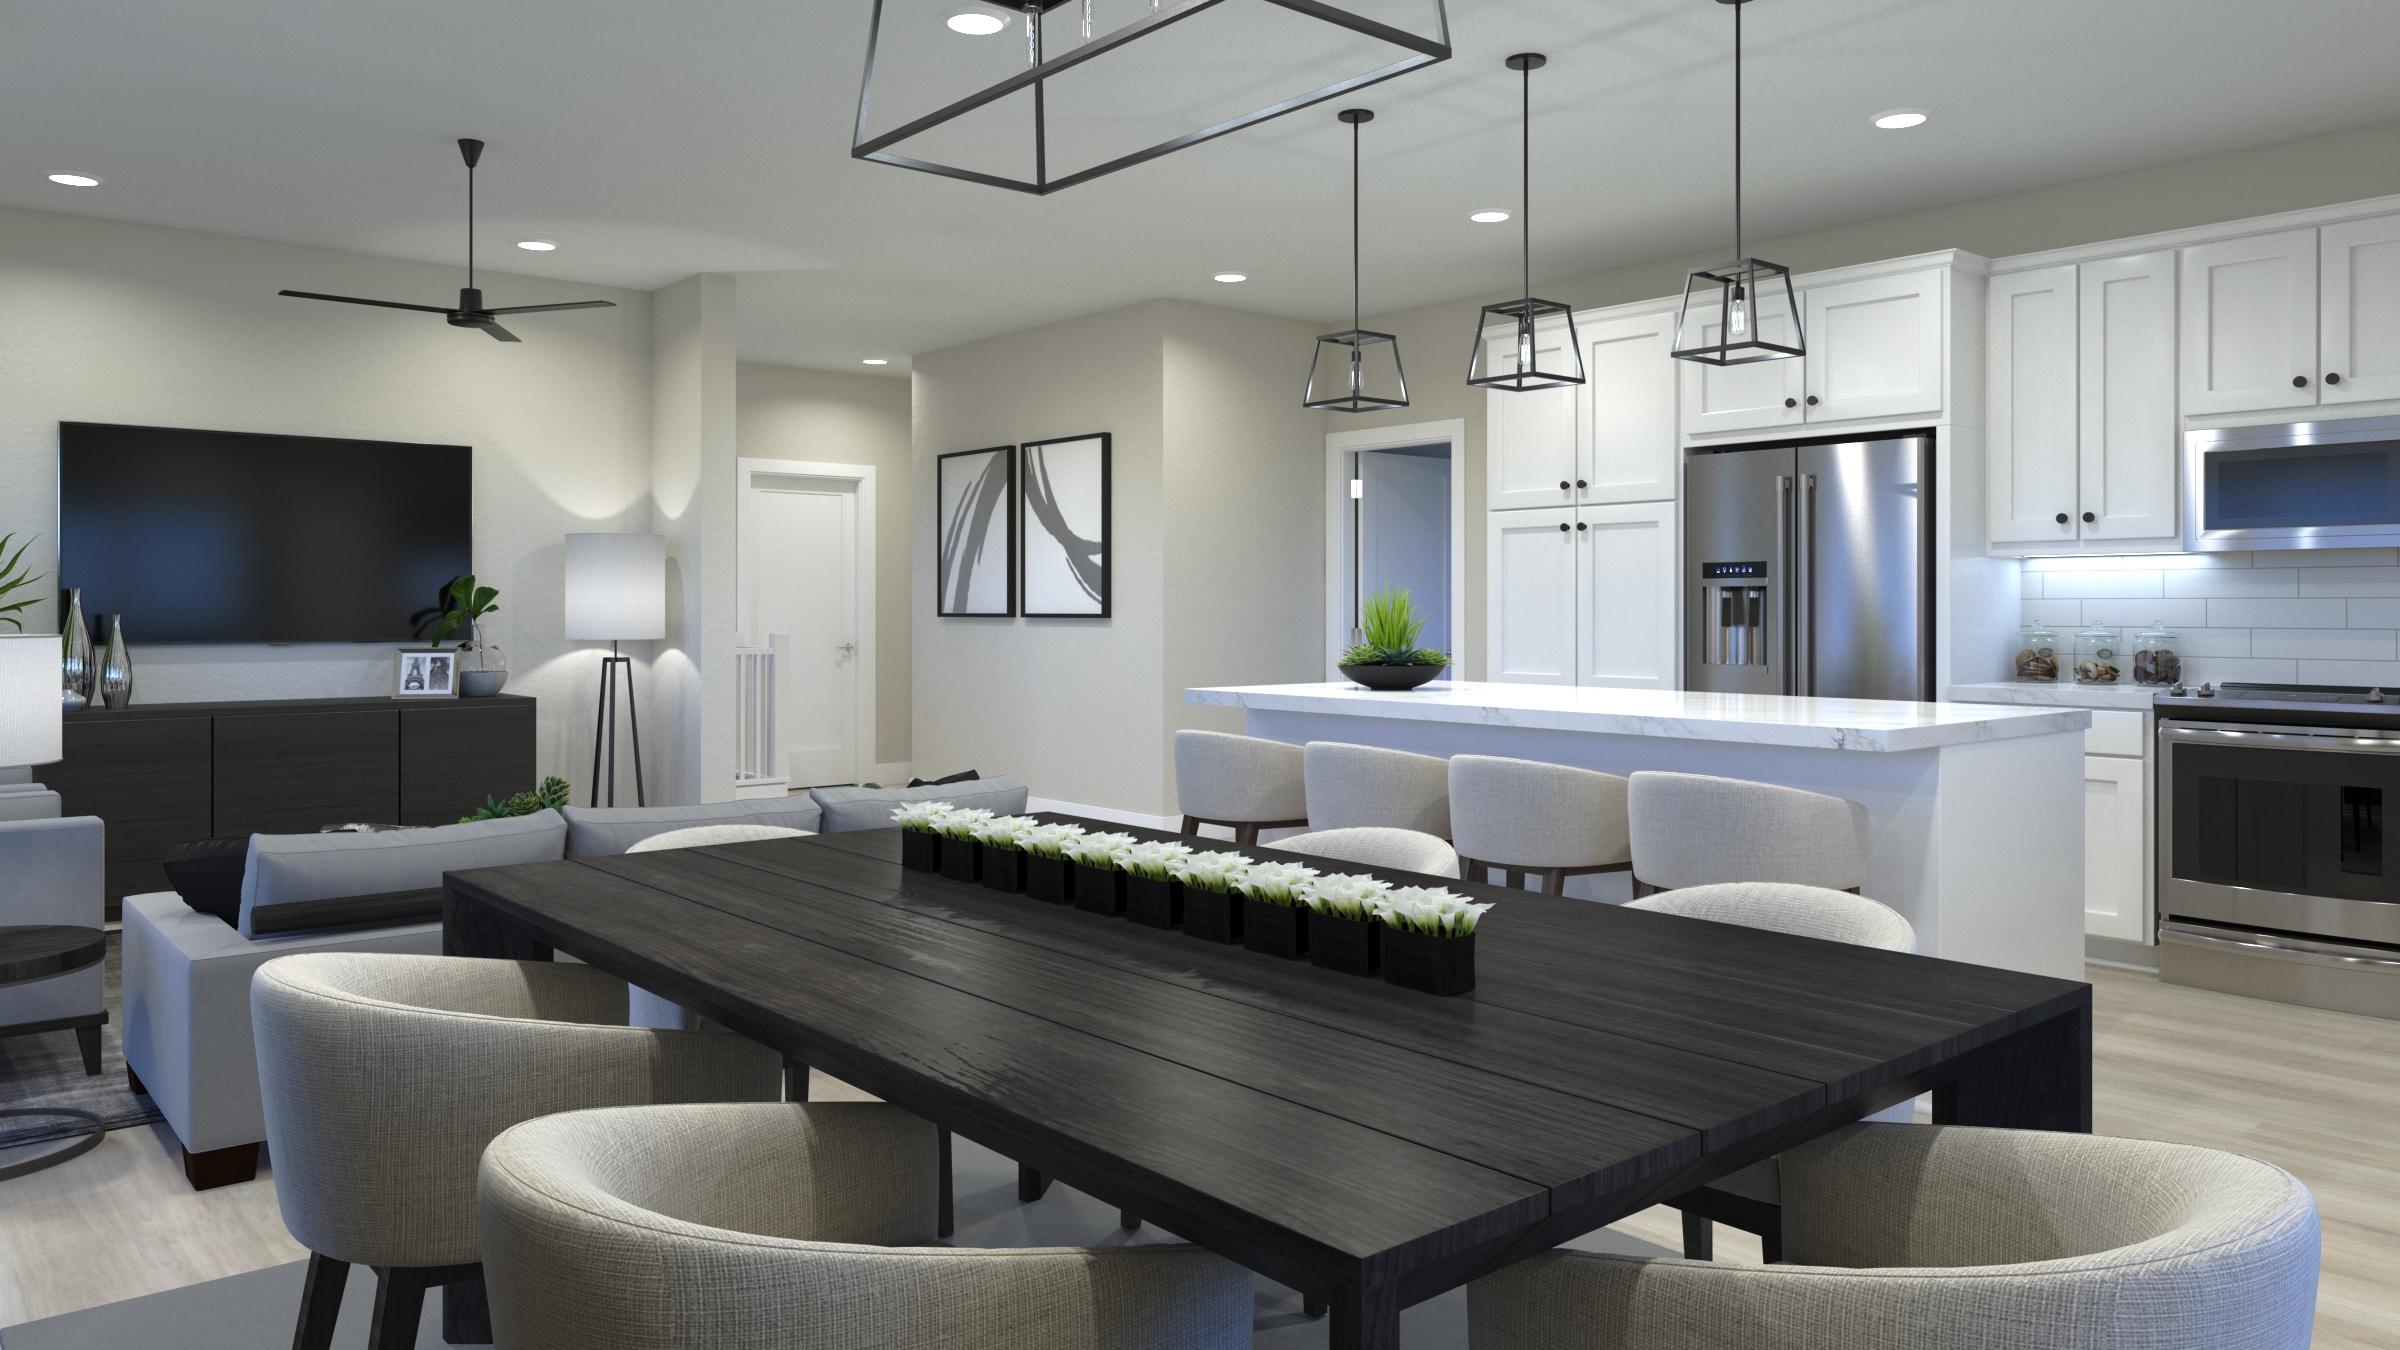 Plan F Living/Dining/Kitchen Area